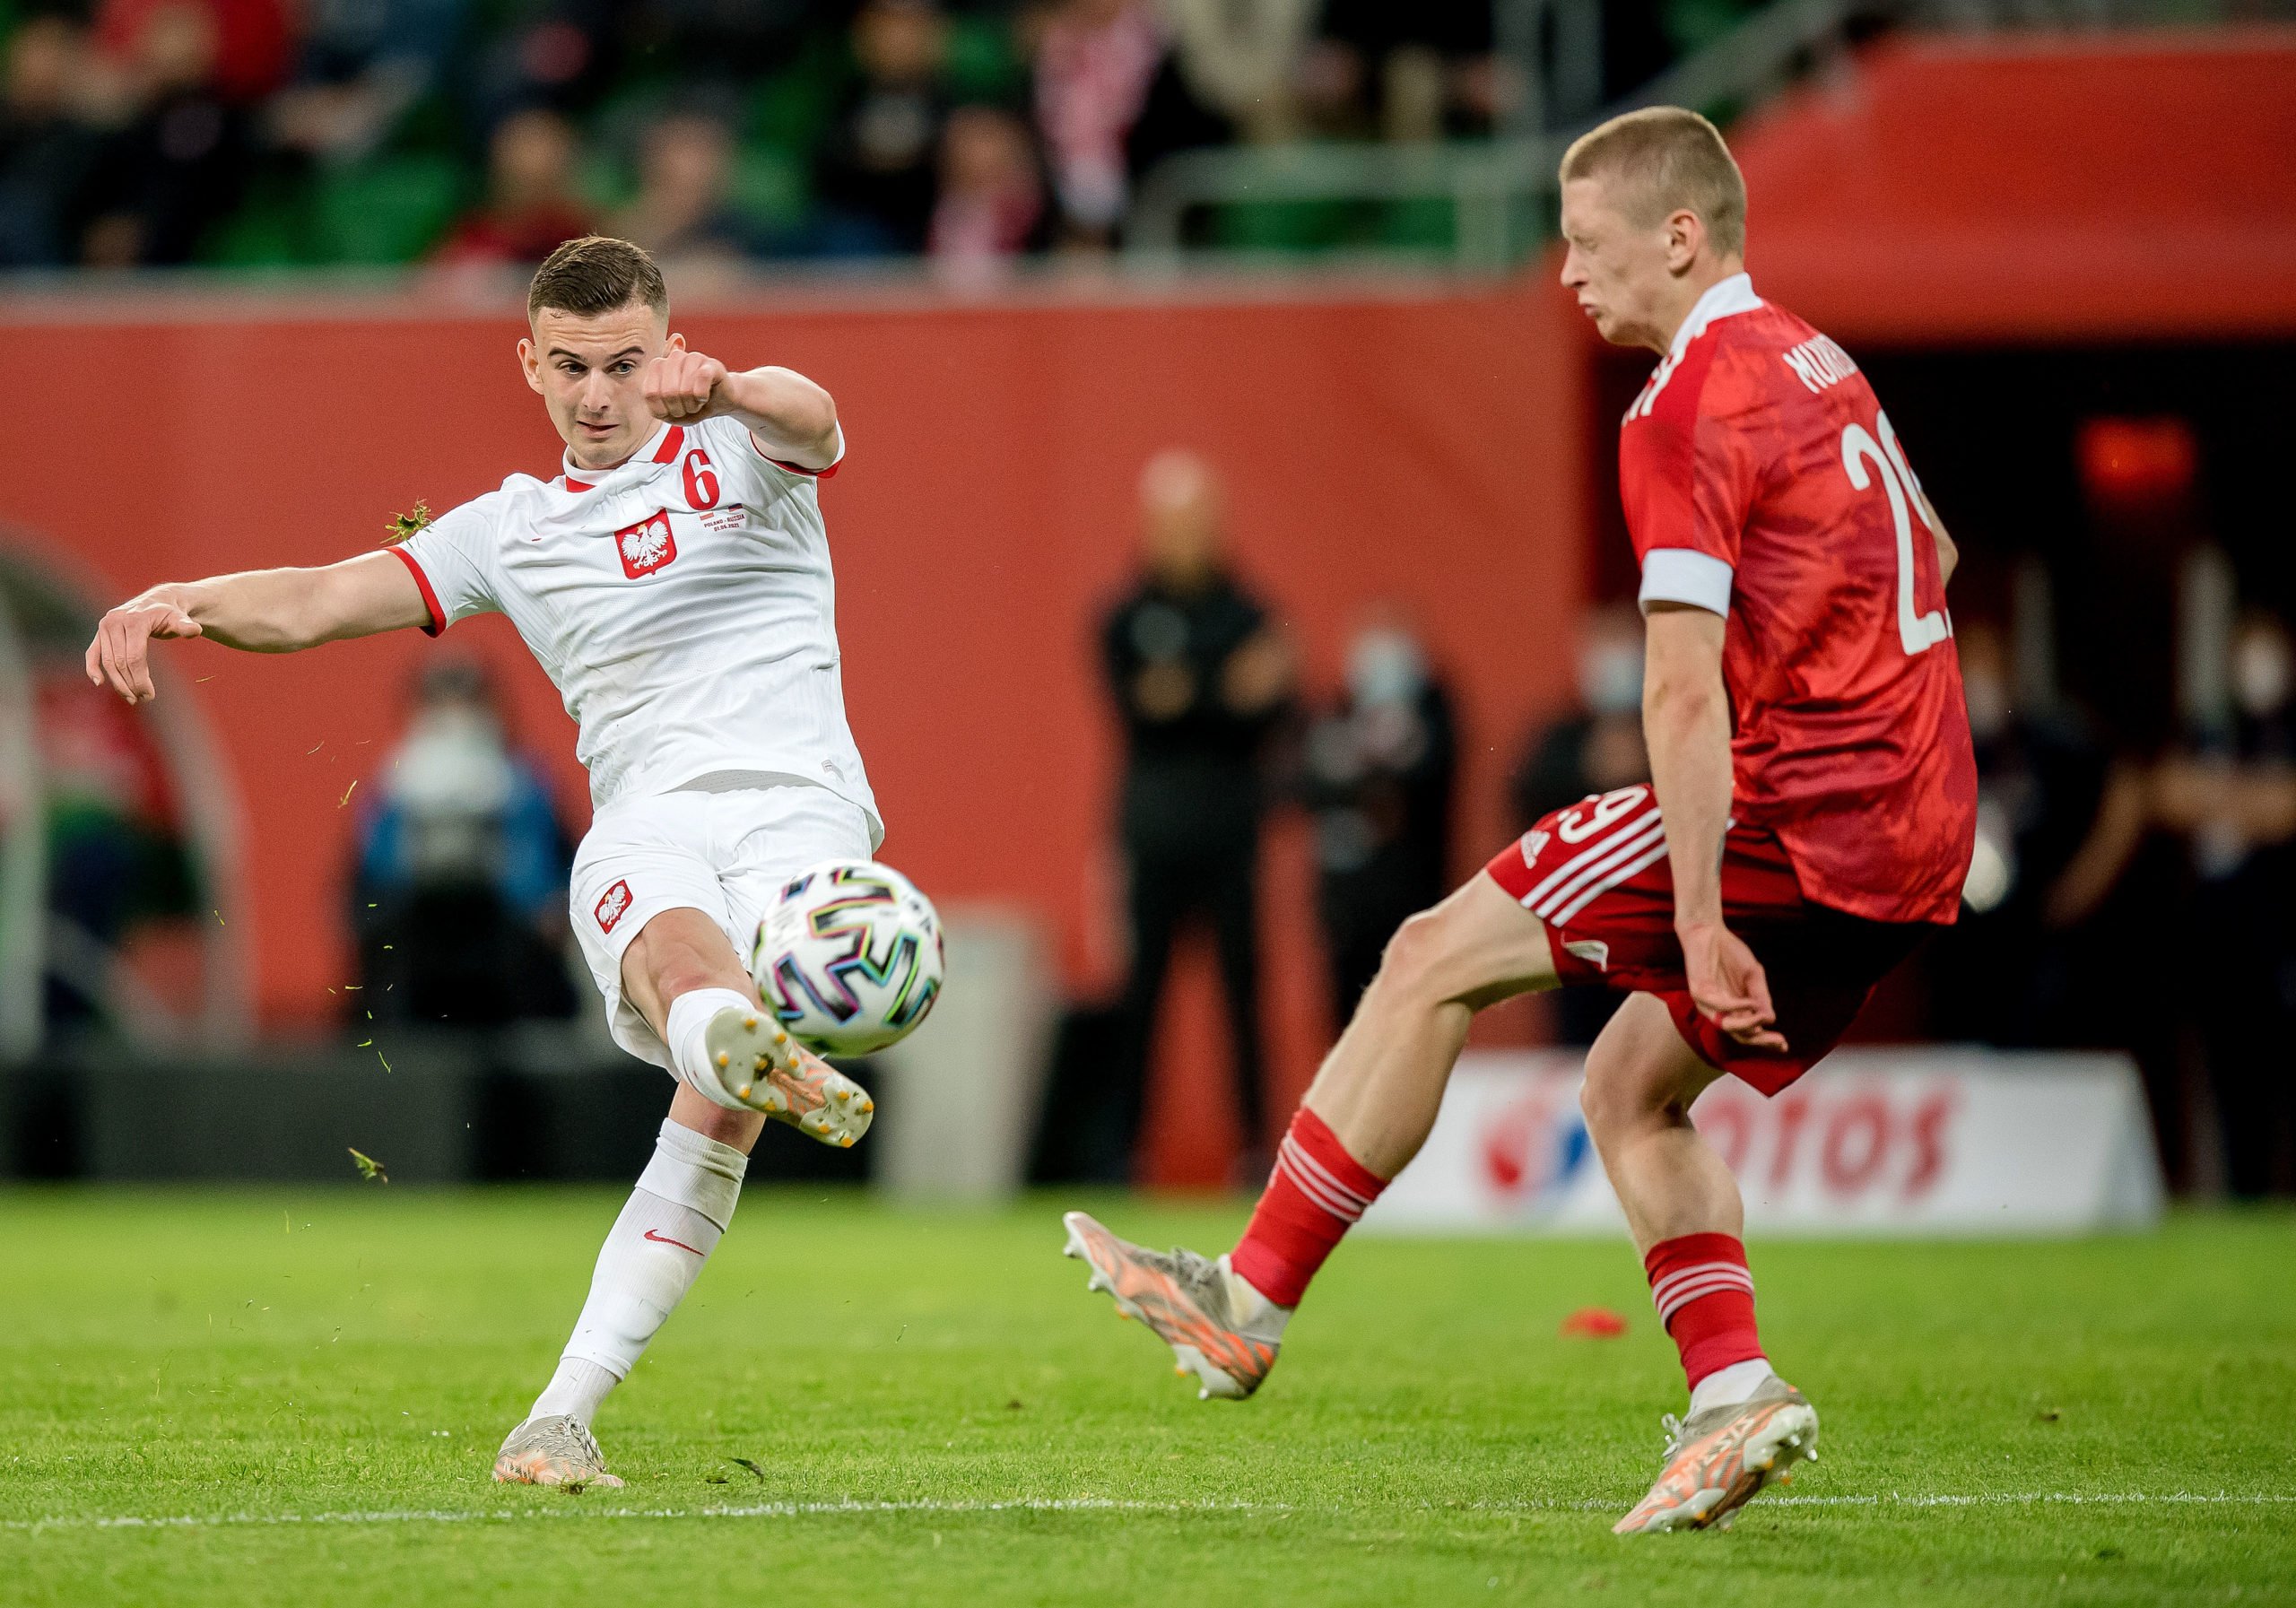 Liverpool target Kacper Kozlowski in action against Russia